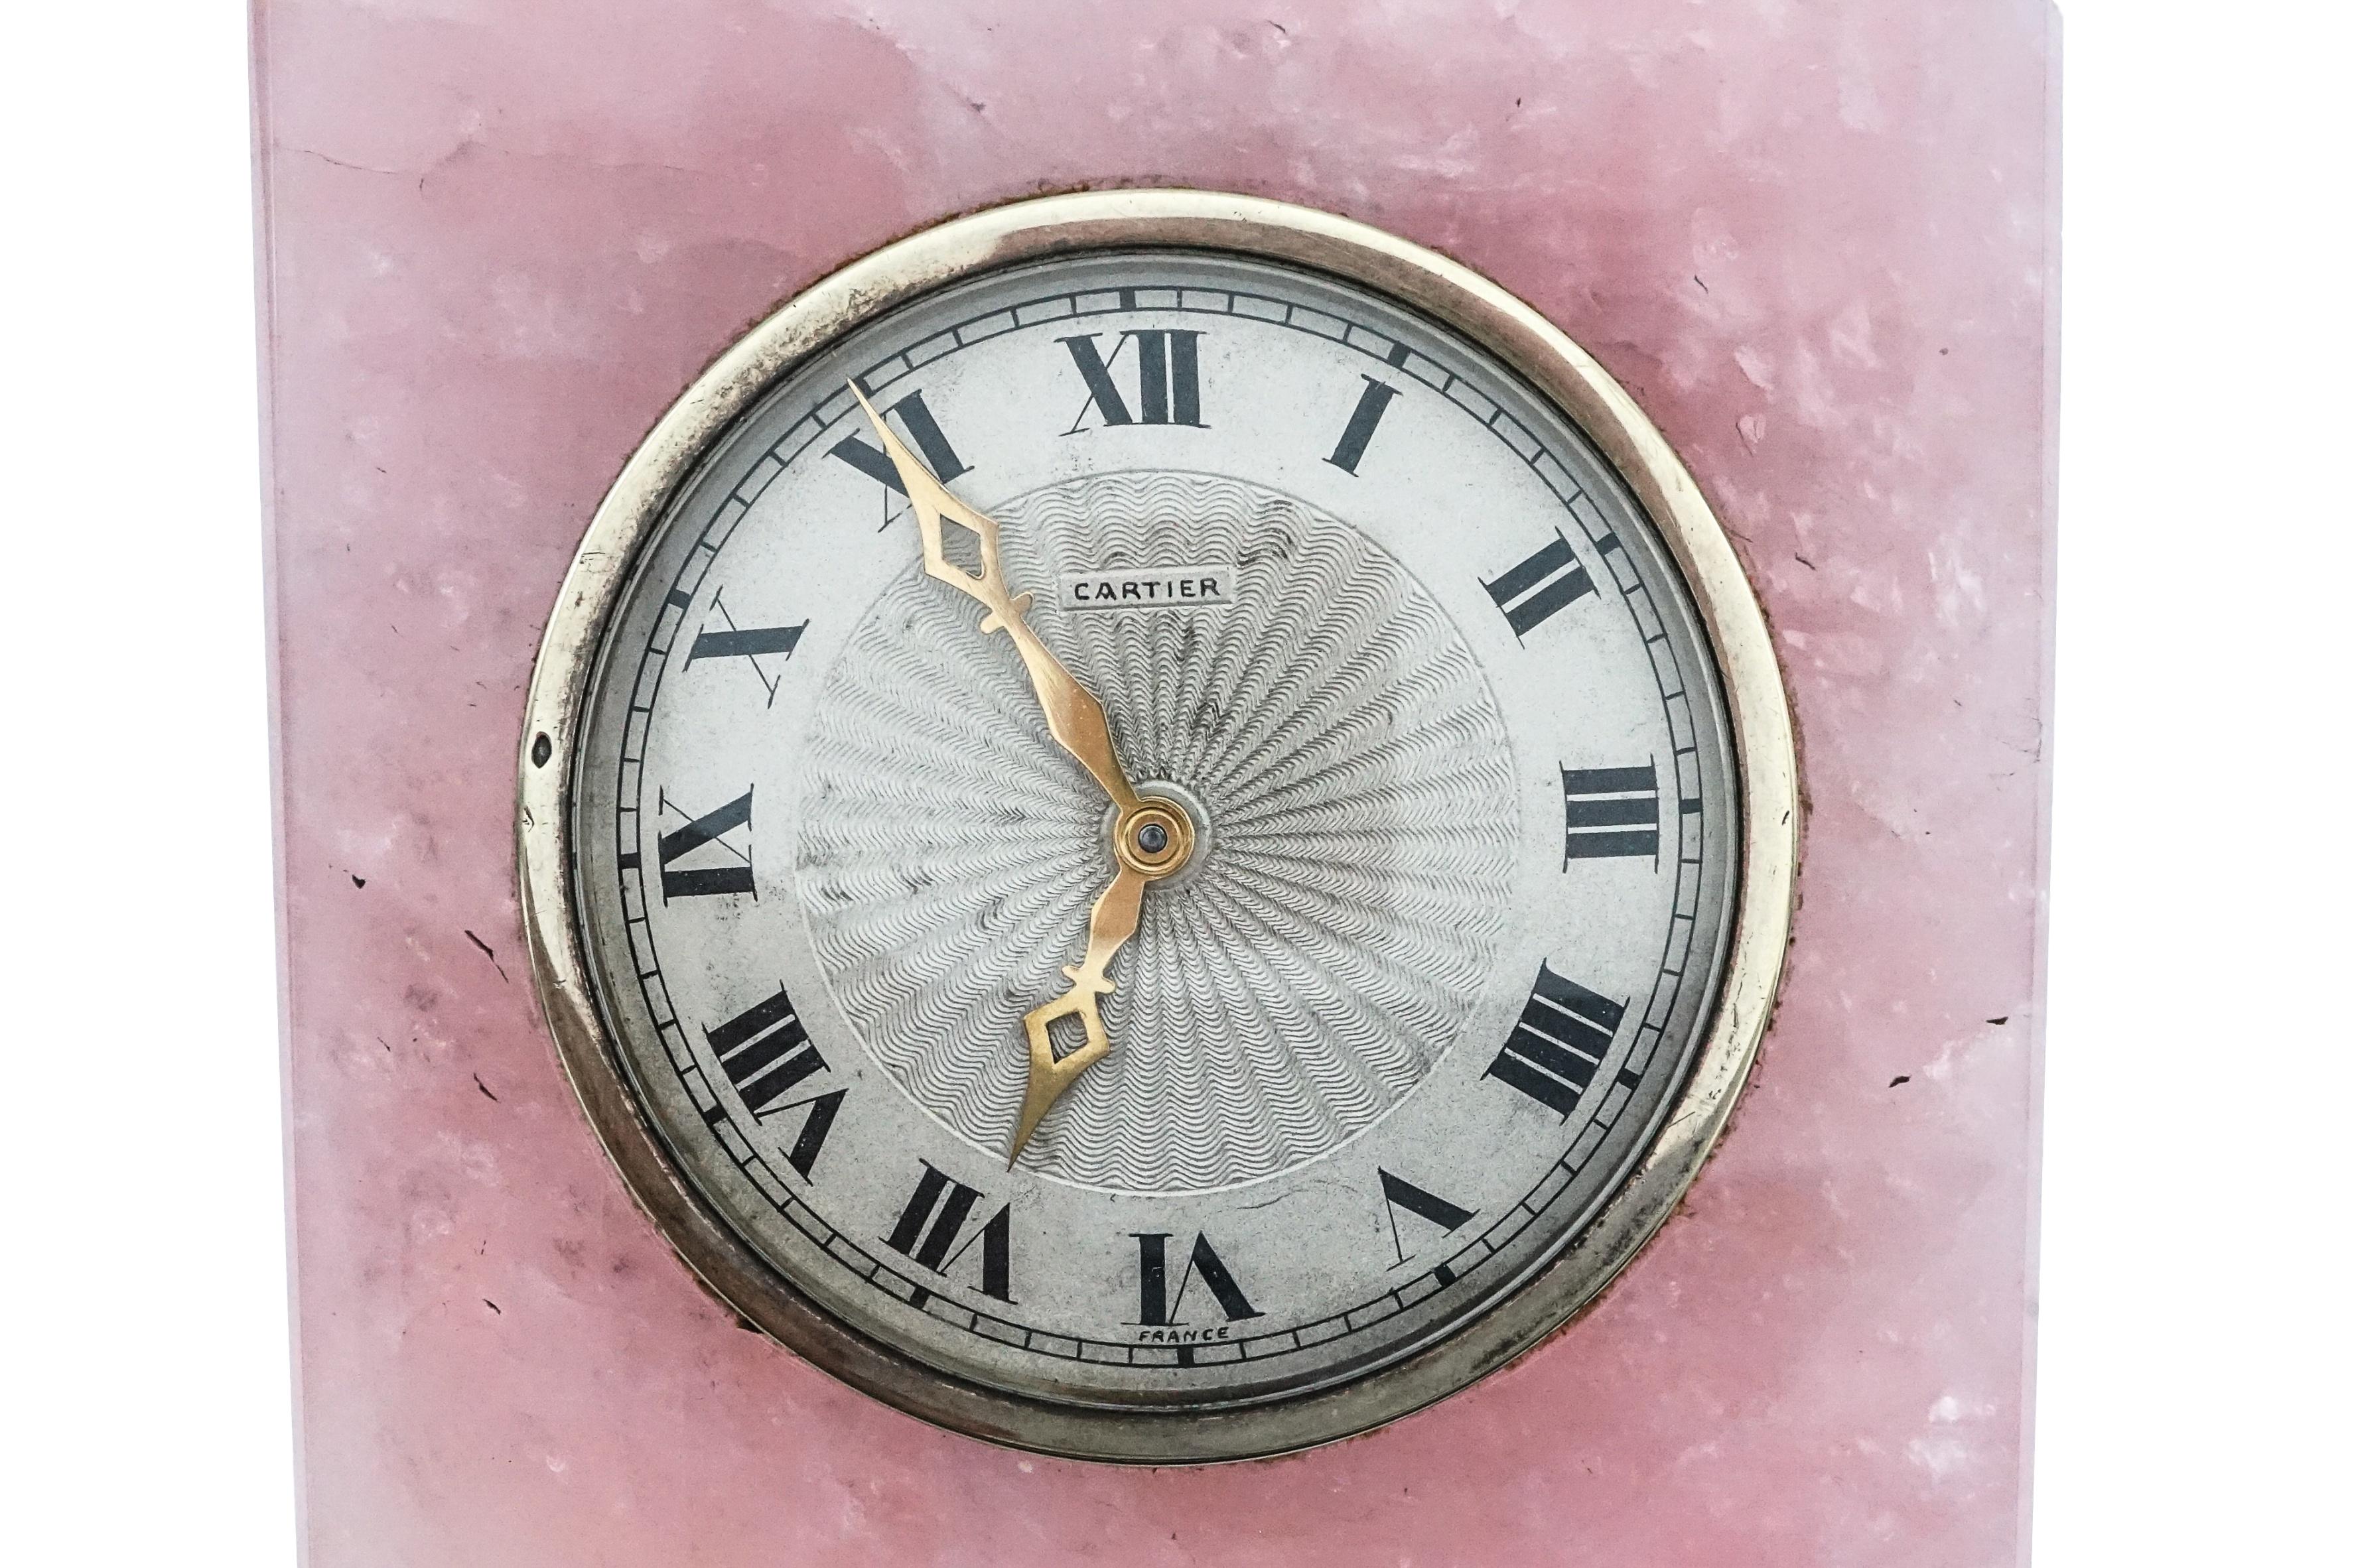 An Art Deco Cartier Rose Quartz Desk Clock. Bezel and hands are gold; dial has Roman numeral indices; measures 10.7 x 7.8 x 2.7cm; weight: 494.5g. Signed Cartier on the dial.

SKU#O-00631